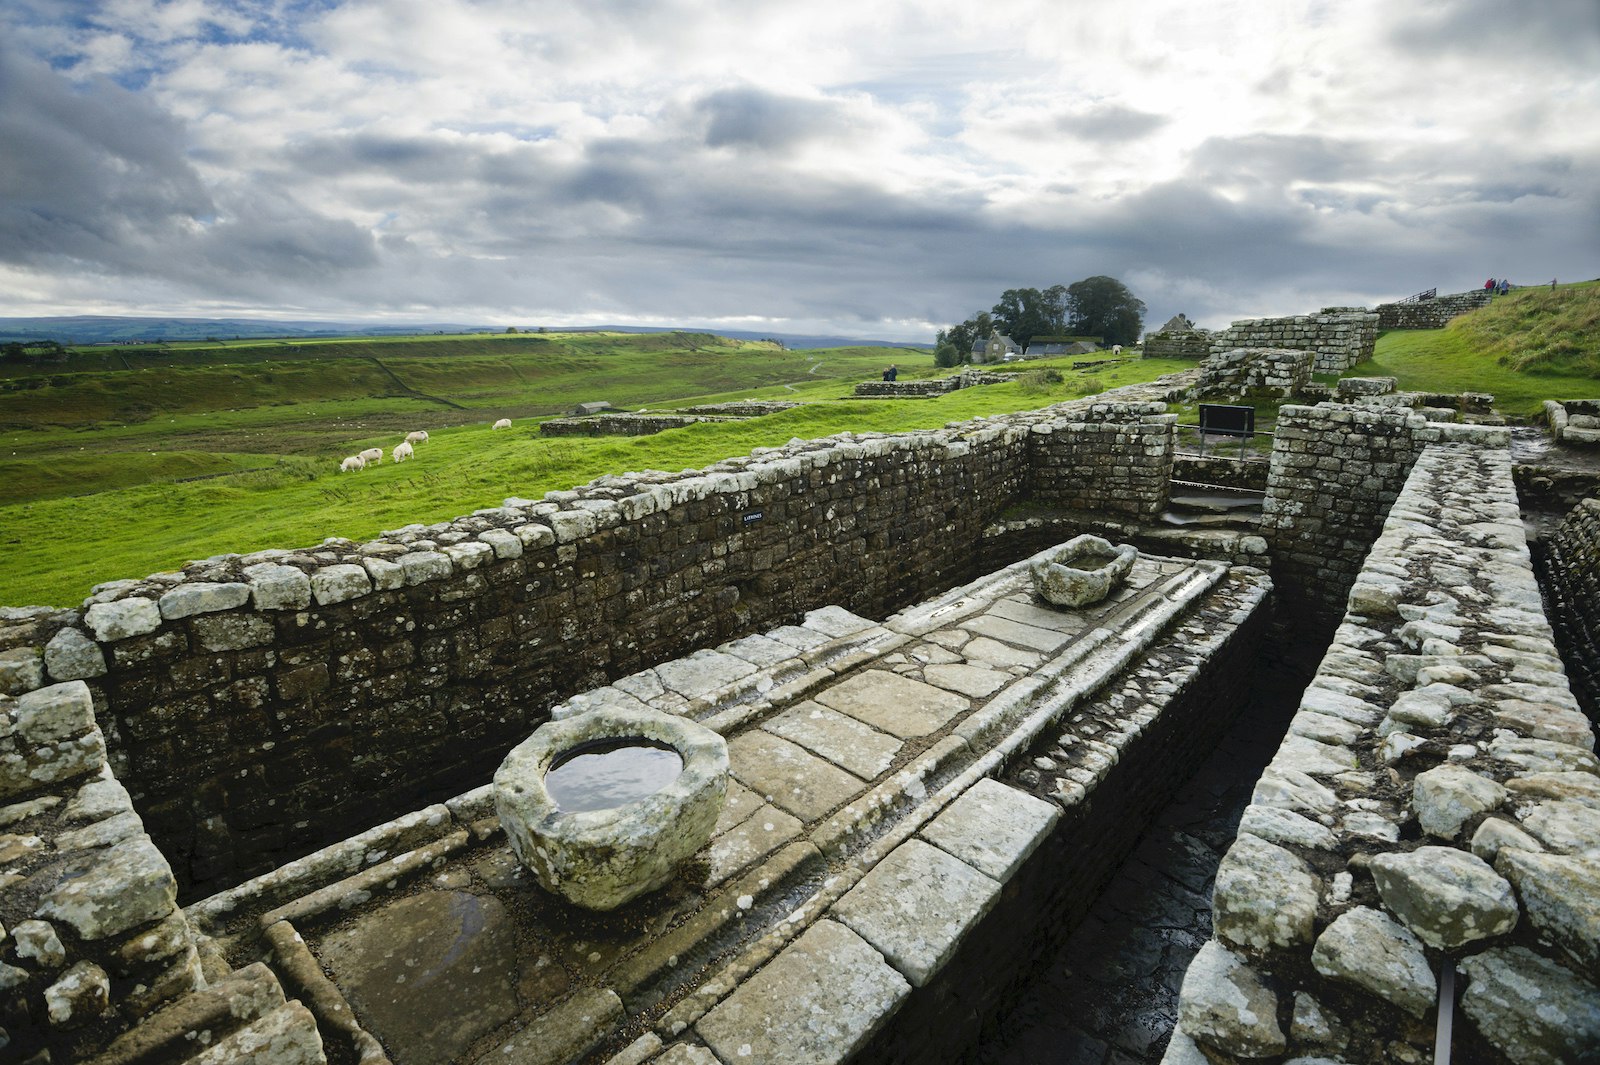 Latrines at Hadrian's Wall with cloudy skies and green moors in the background